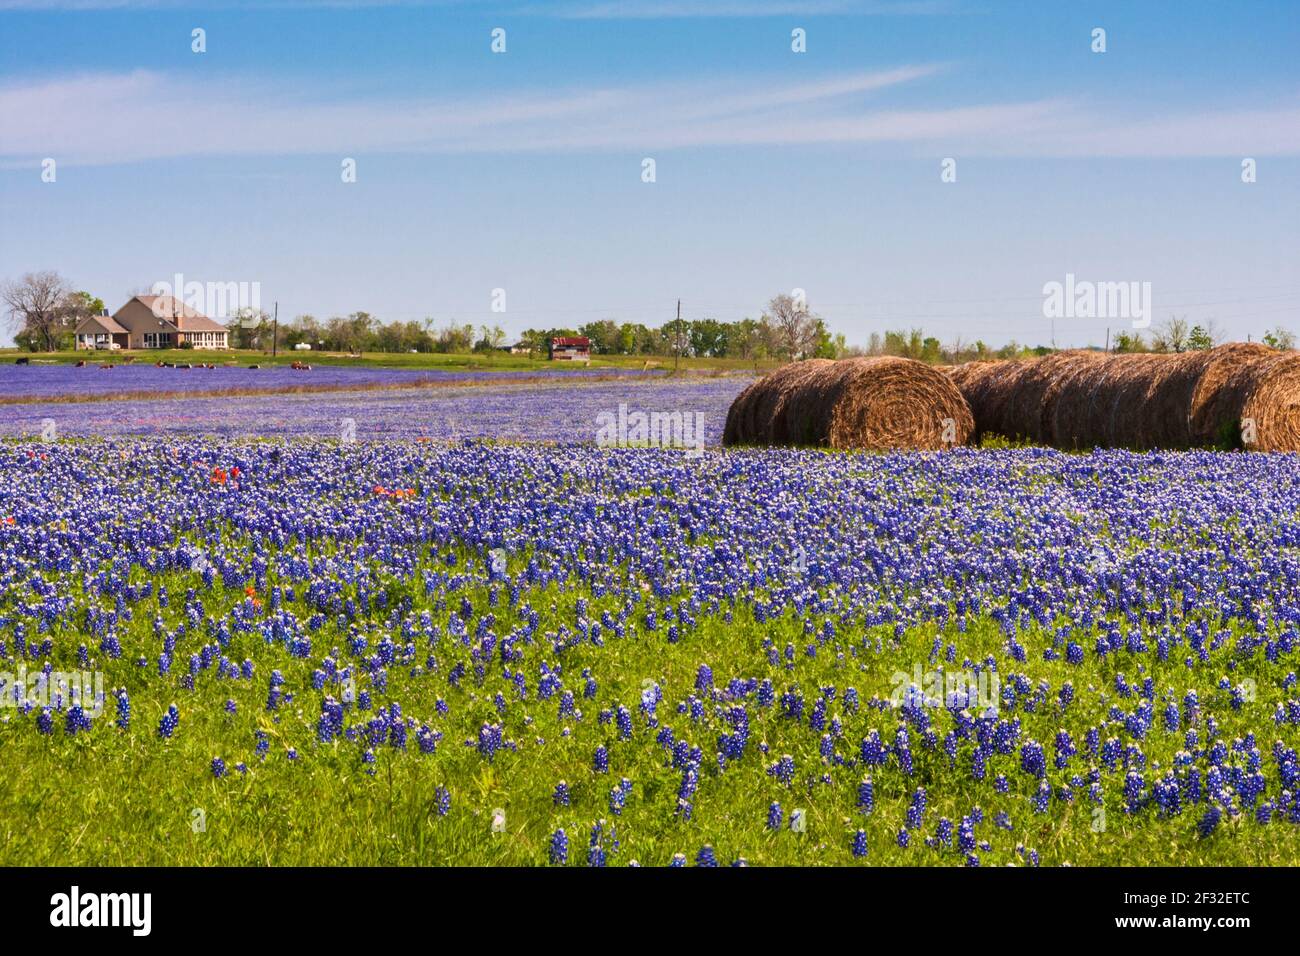 A field of Texas Bluebonnets, Lupinus texensis, with hay bales on a ranch along Texas highway 382 near Whitehall, Texas. Stock Photo